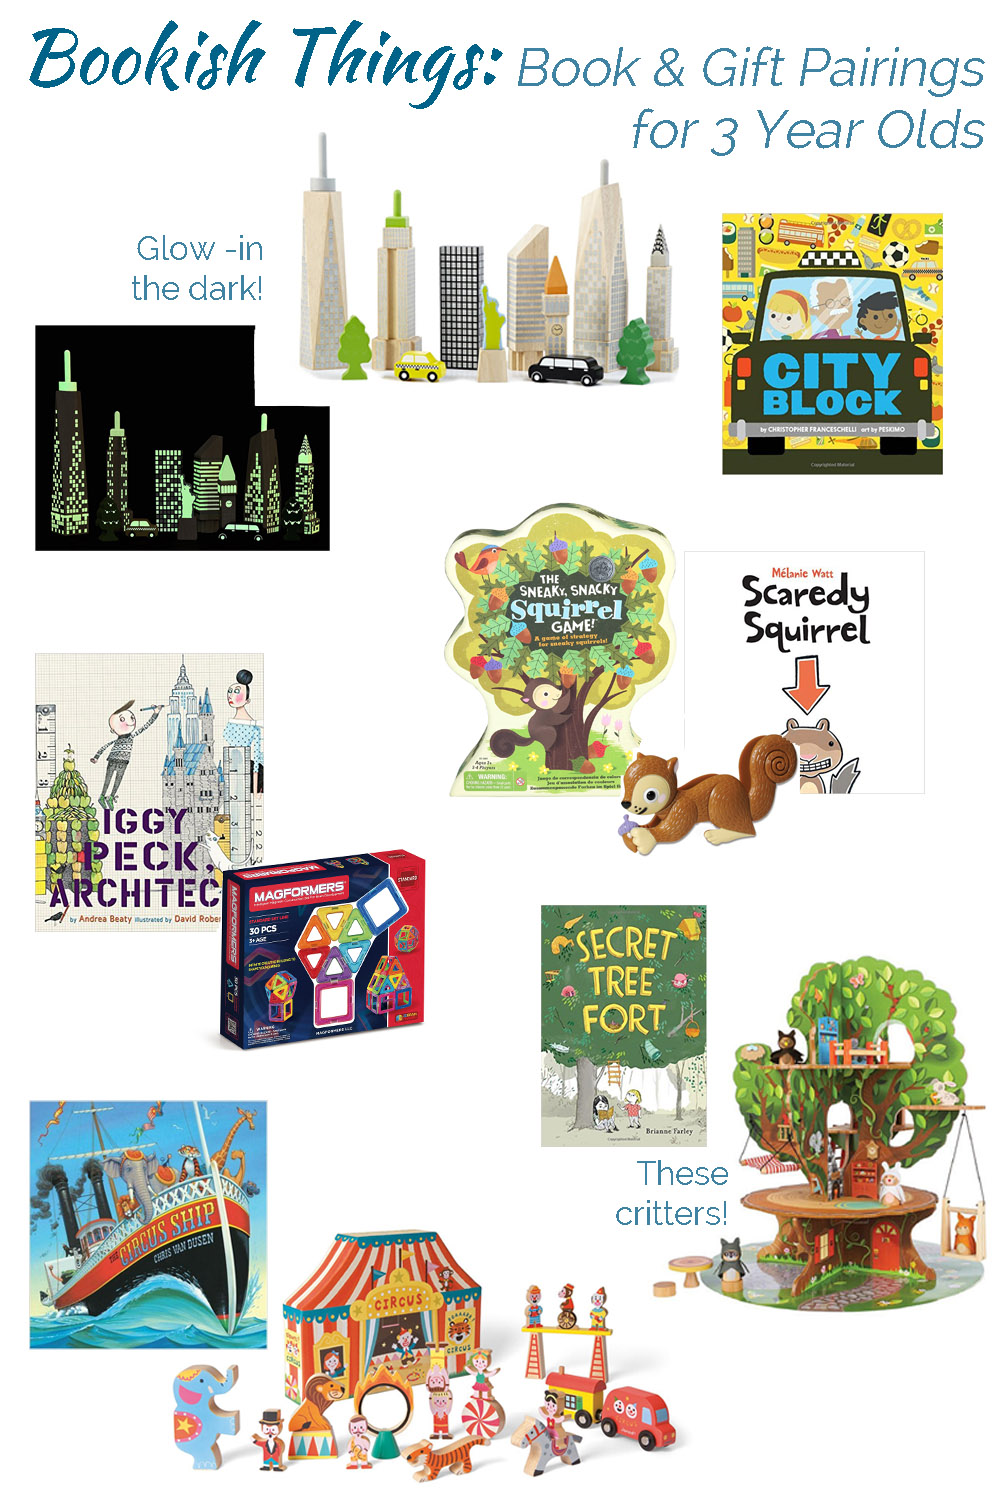 Bookish Things: Book and Gift pairings for 3 year olds